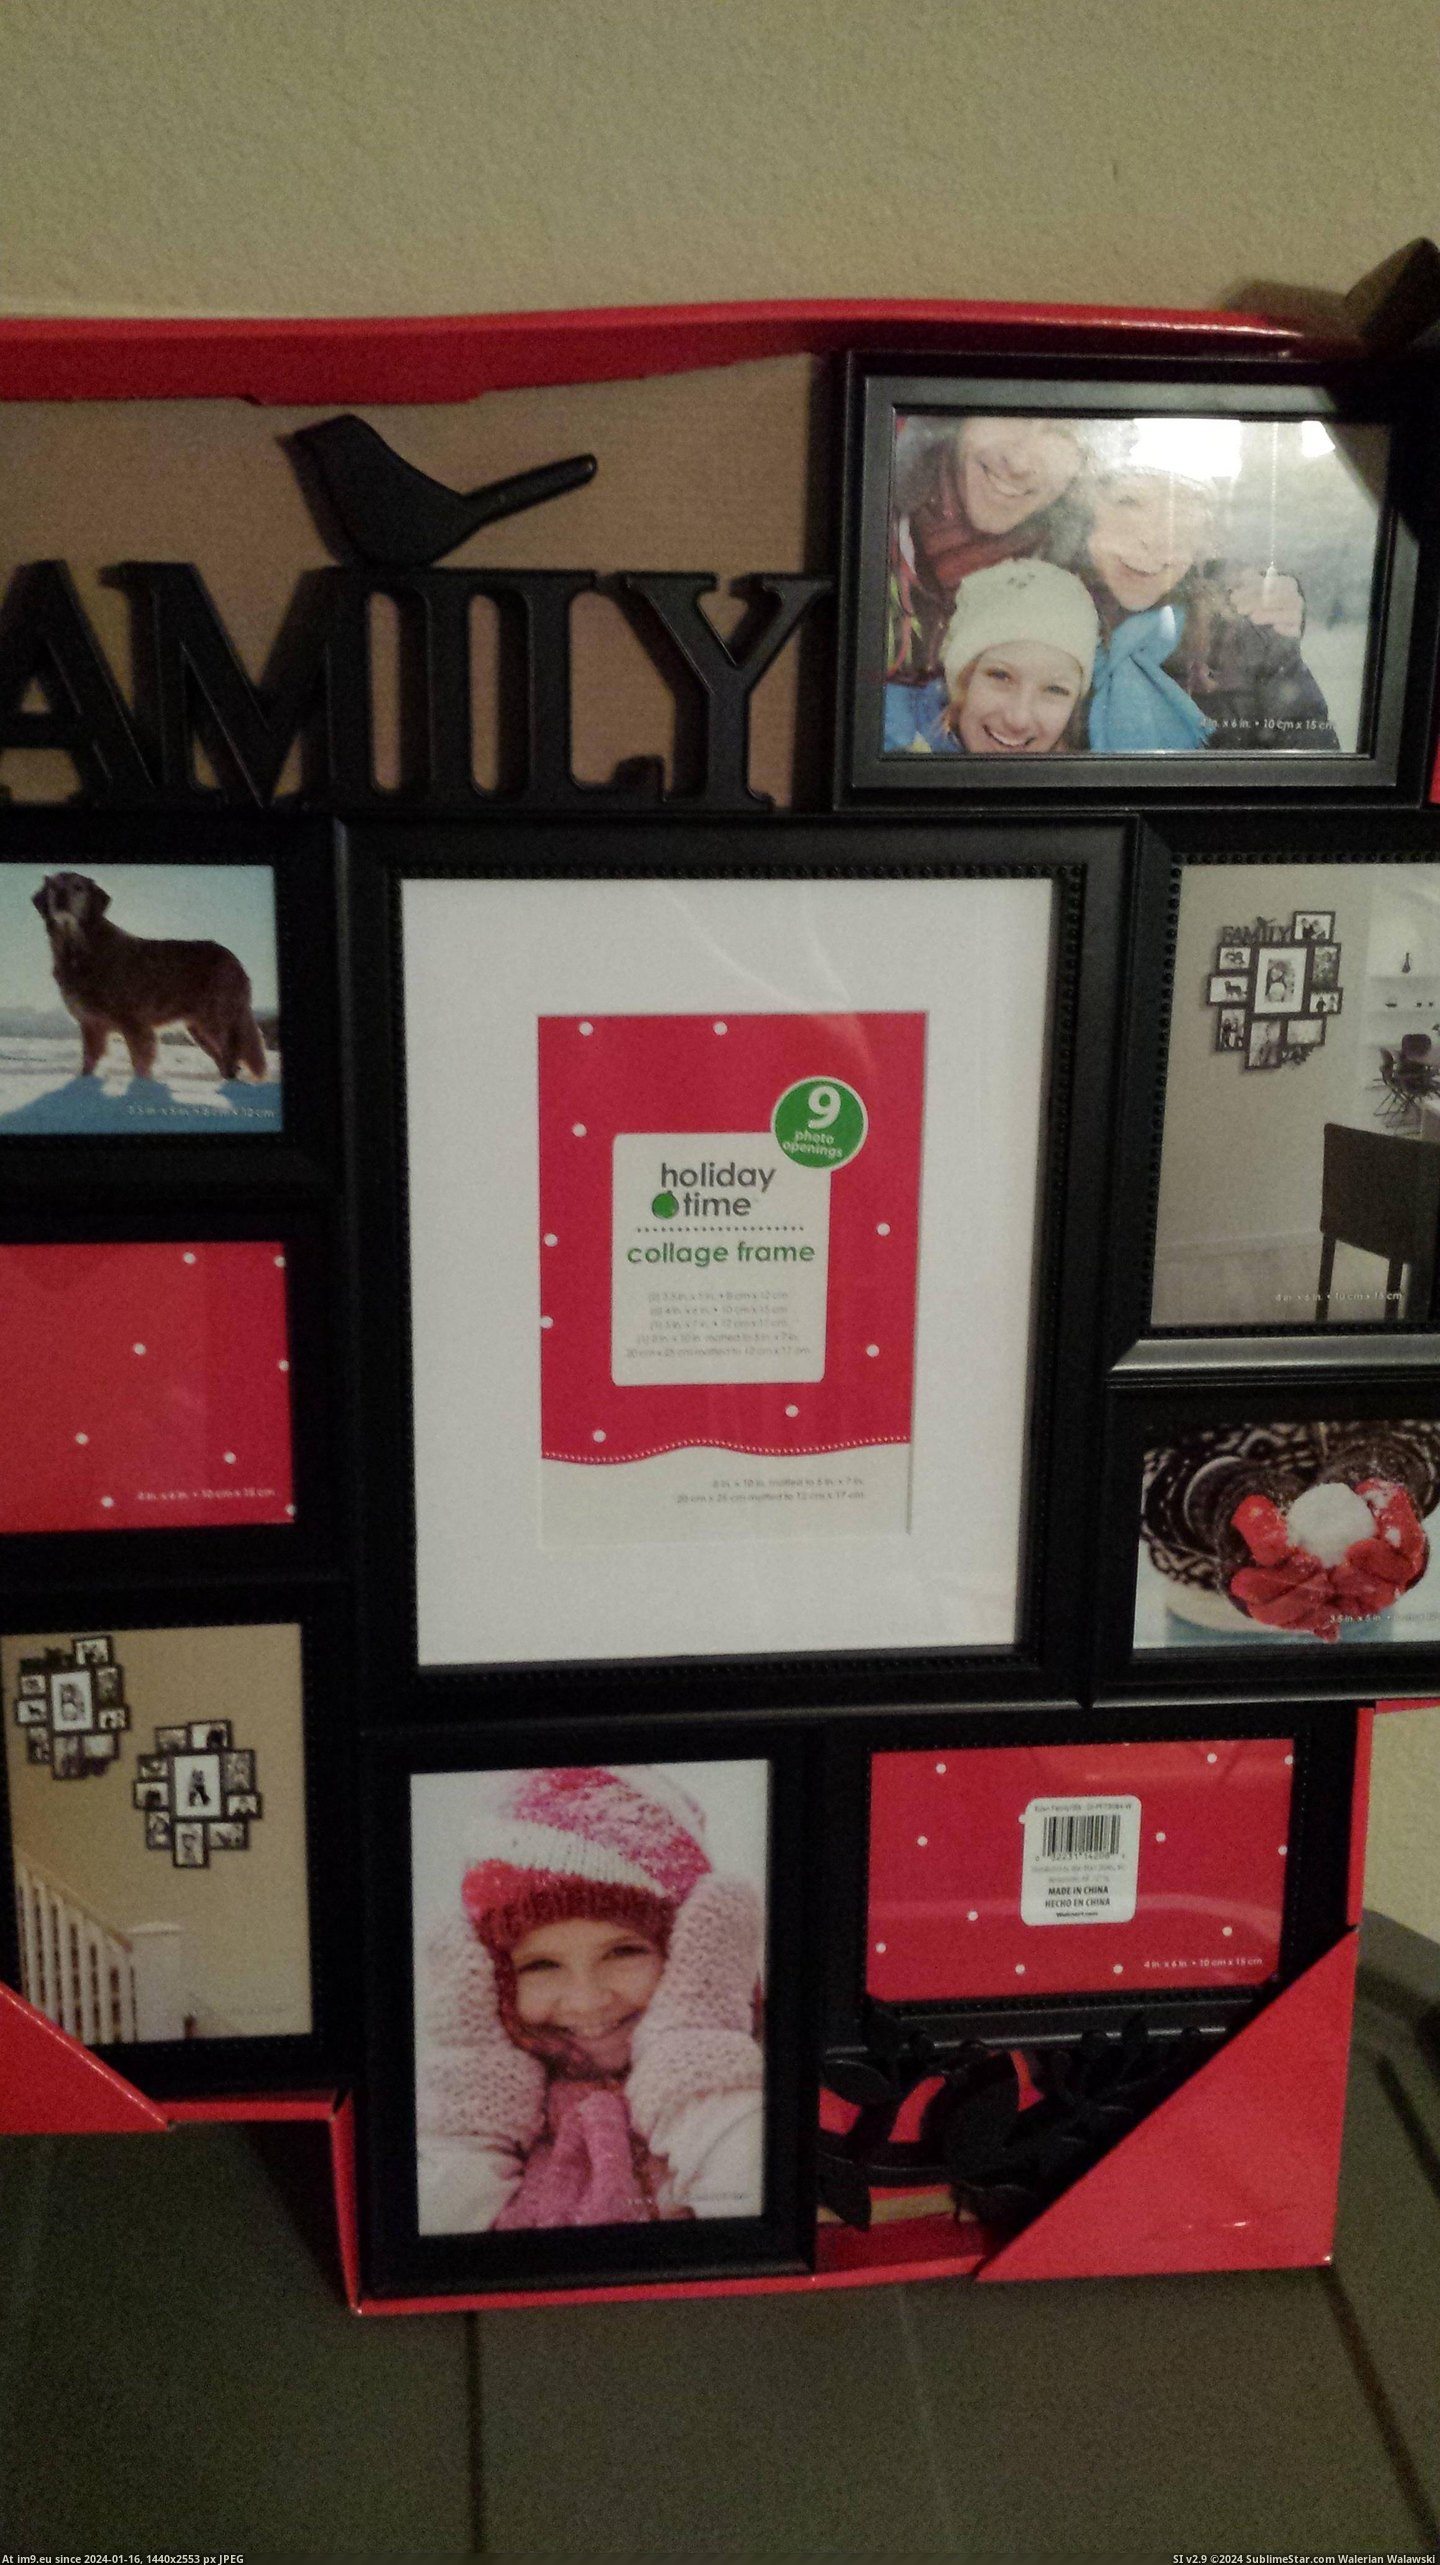 #Photos #Holiday #Promo #Picture [Mildlyinteresting] This holiday picture frame has pictures of itself in the promo photos. Pic. (Image of album My r/MILDLYINTERESTING favs))